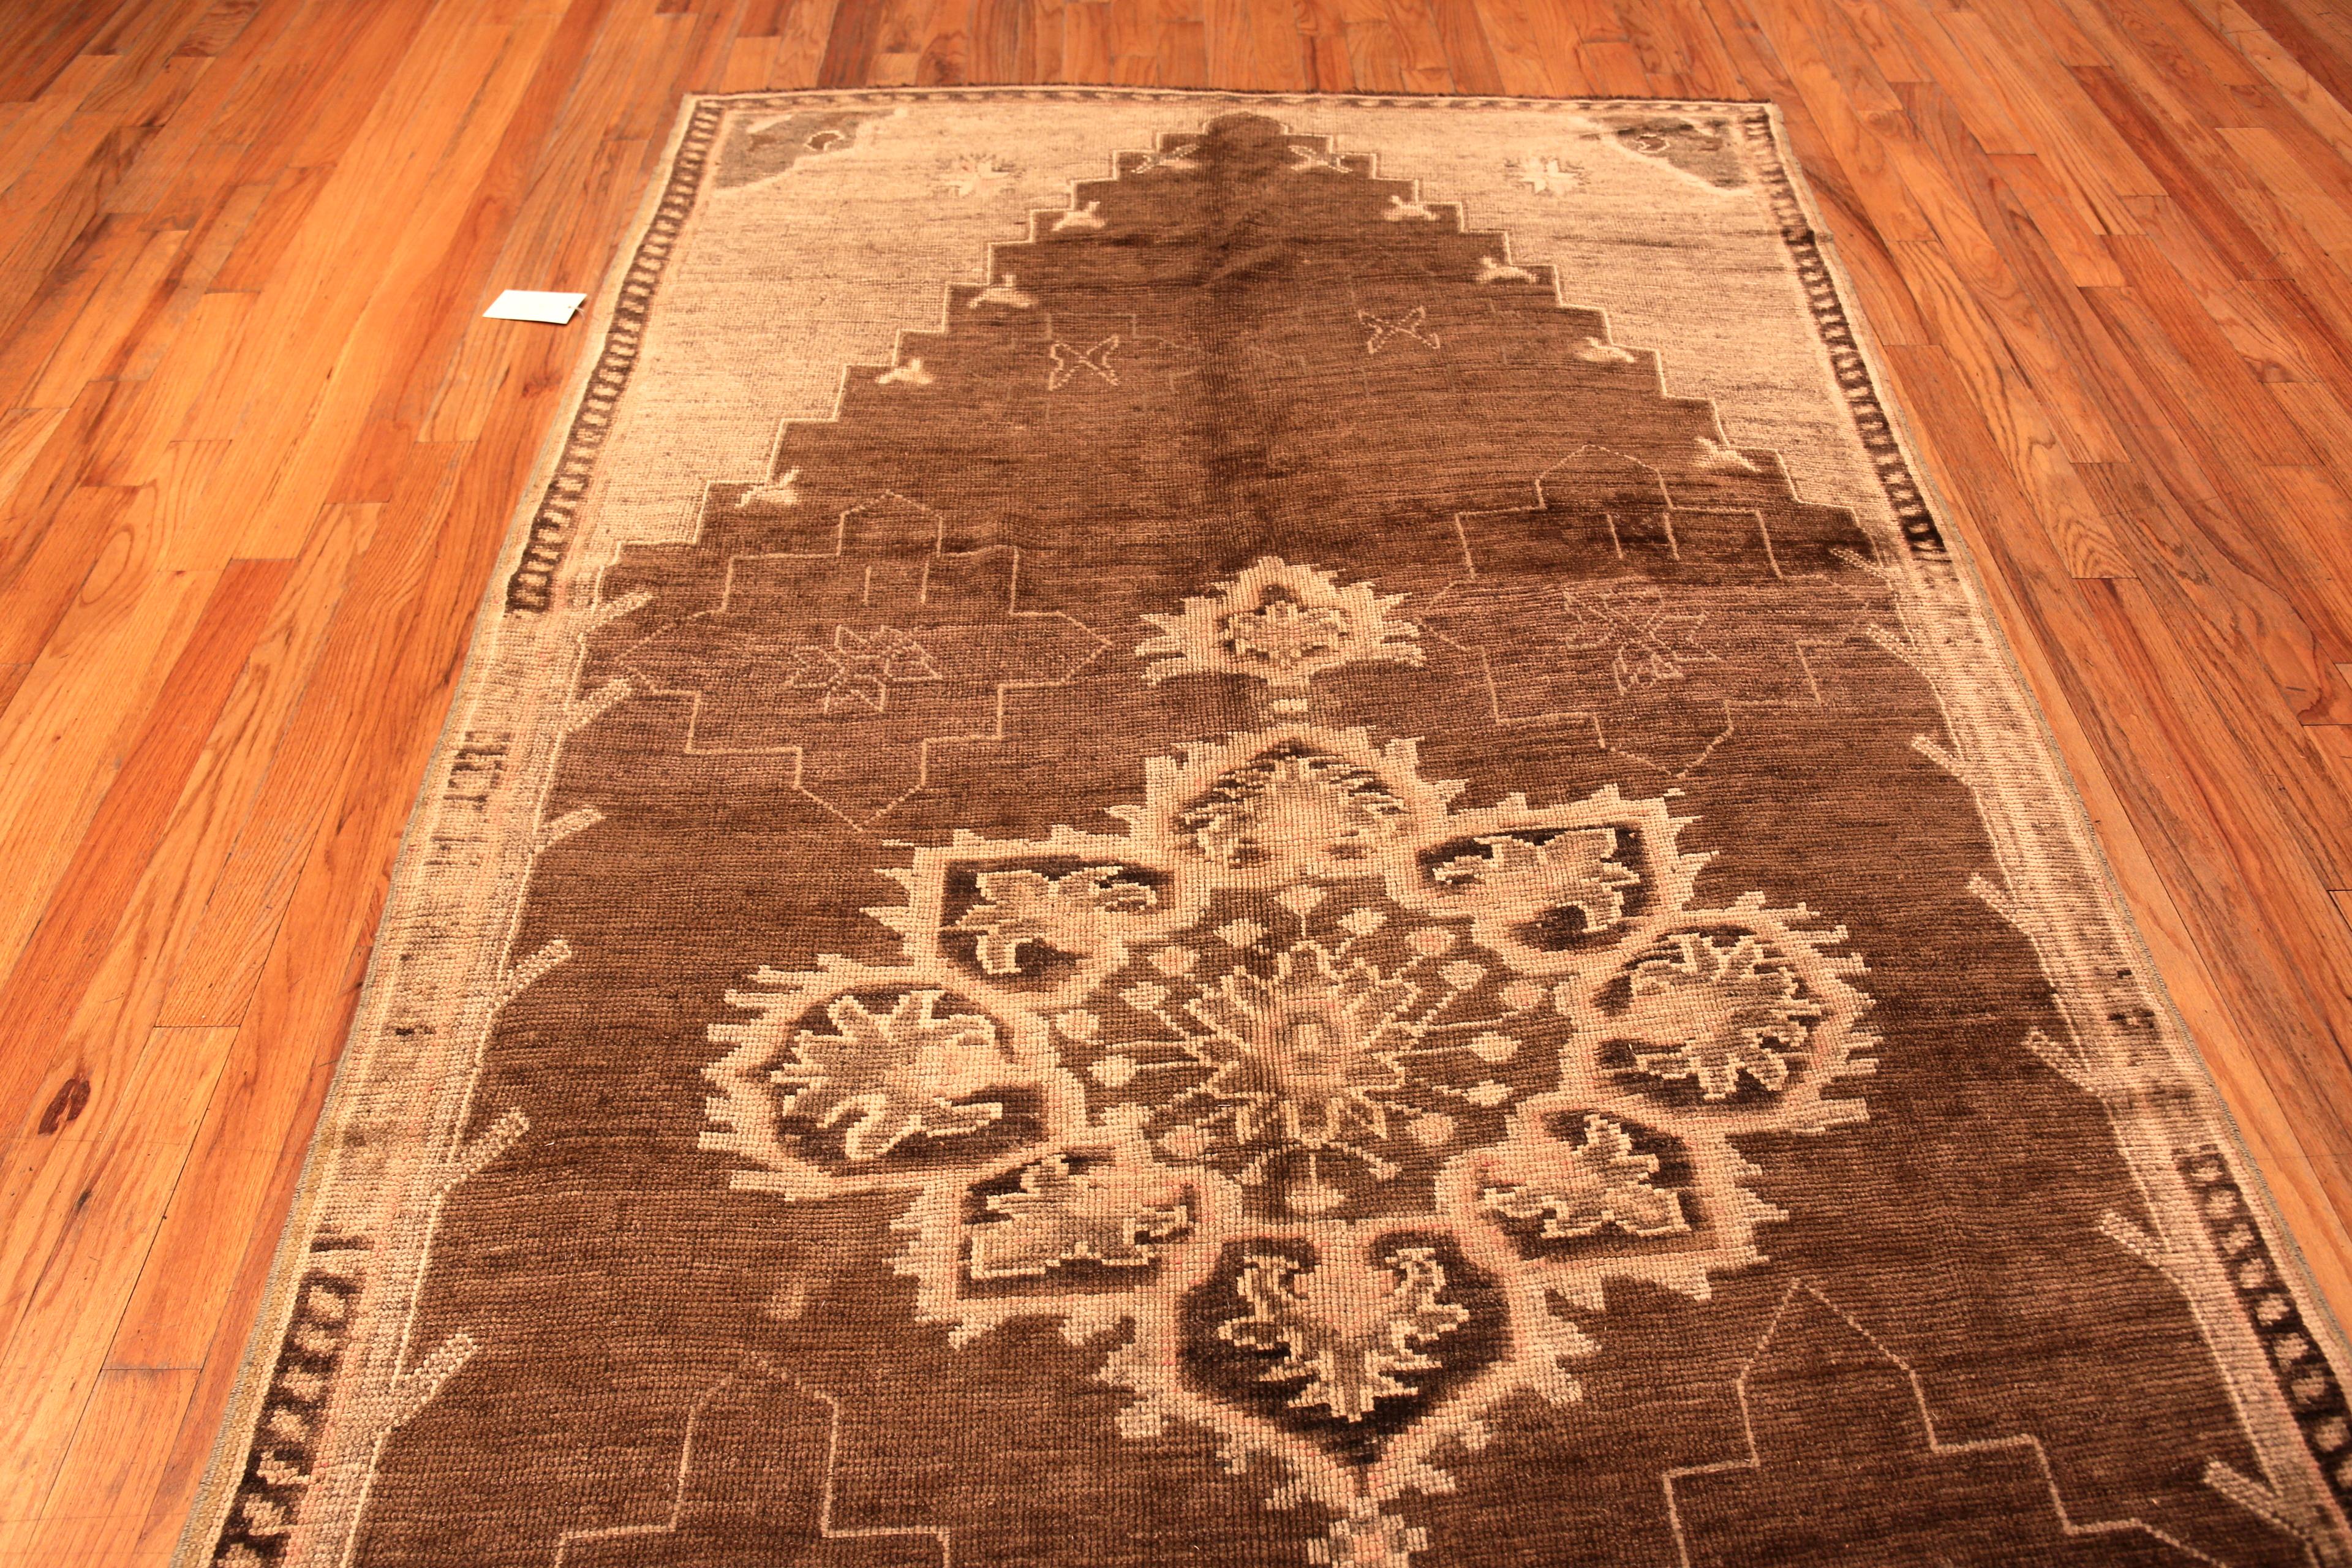 Beautiful Oriental Design Brown Vintage Turkish Kars Rug, Country Of Origin: Turkey, Circa date: Vintage – Kars rugs hold a distinctive place in interior design. they have an earthy feel and tribal quality that is warm and inviting. They make the